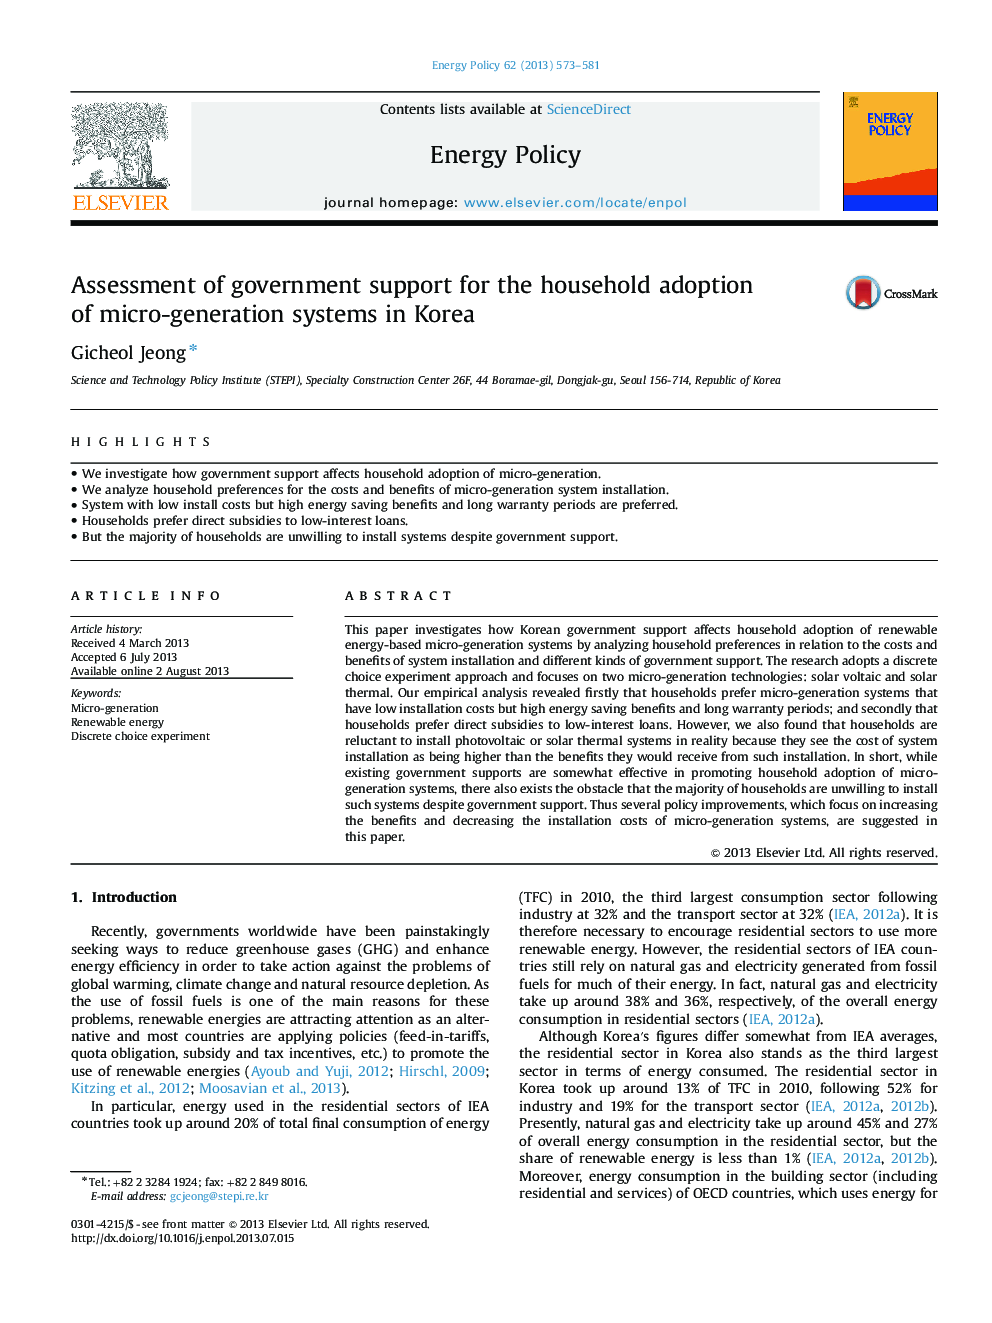 Assessment of government support for the household adoption of micro-generation systems in Korea